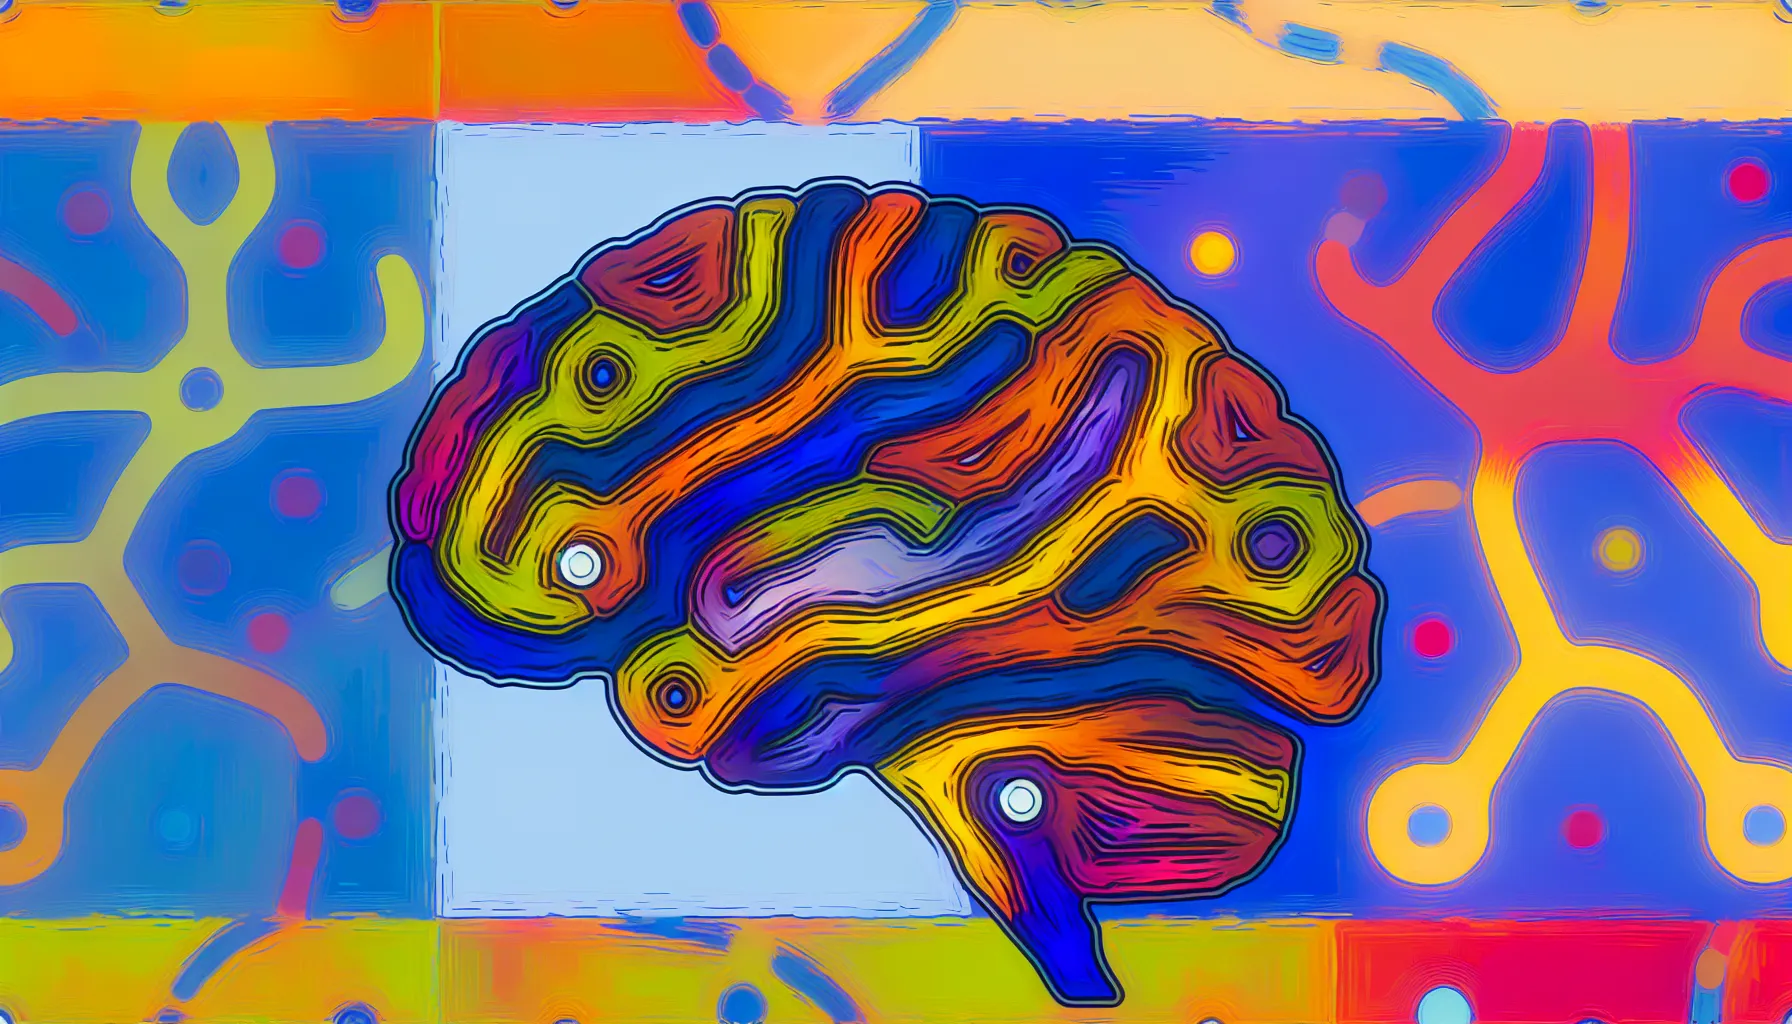 Abstract image of the prefrontal cortex